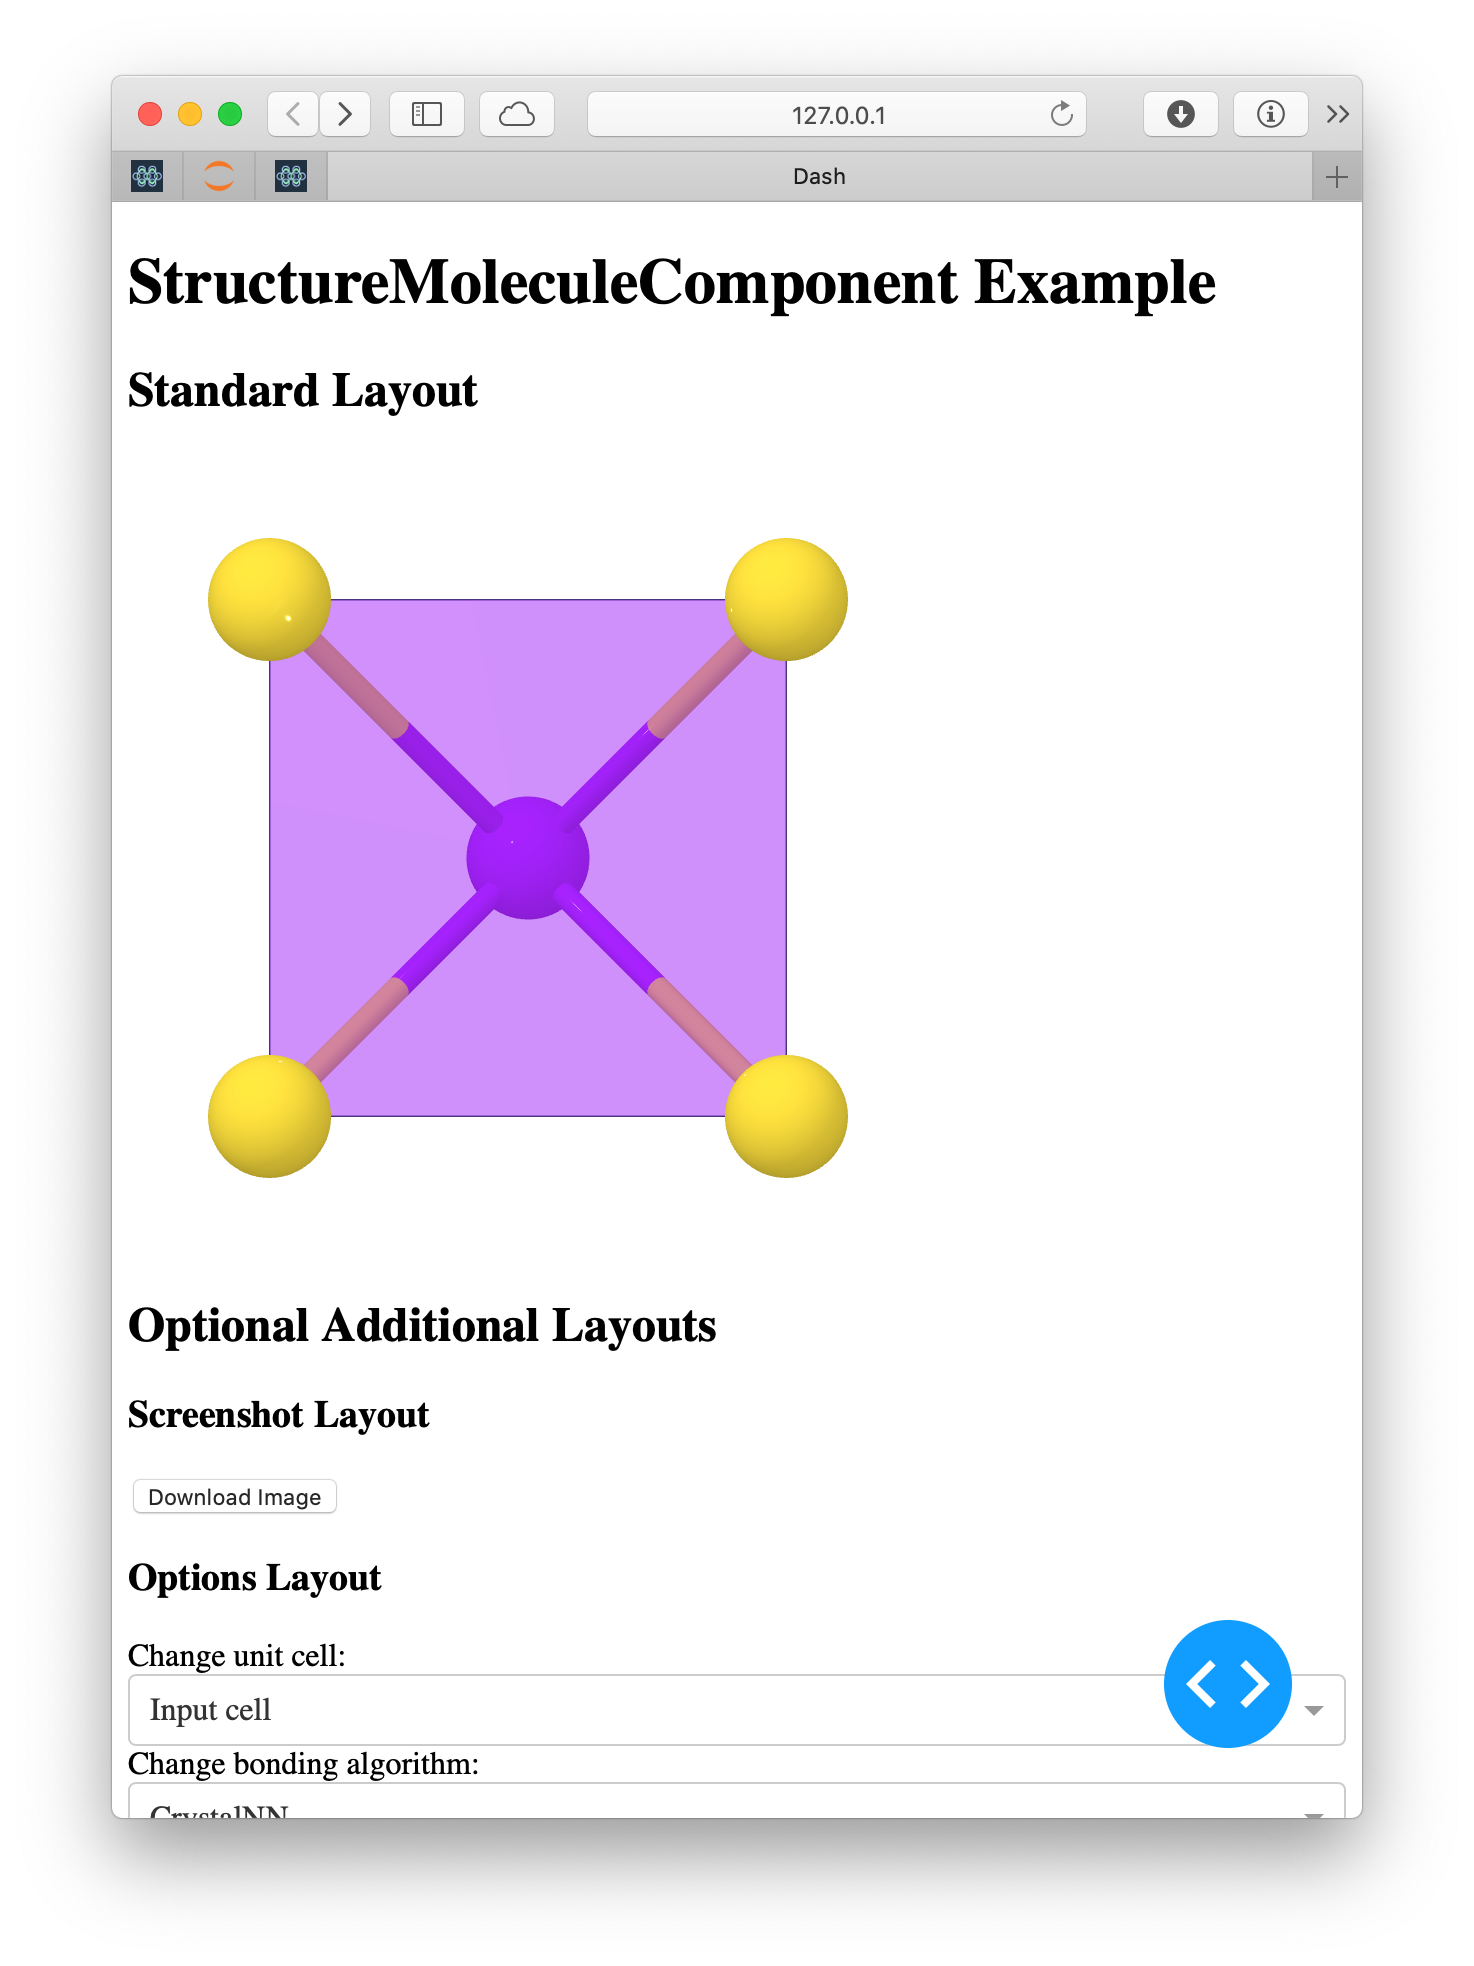 Example of StructureMoleculeComponent